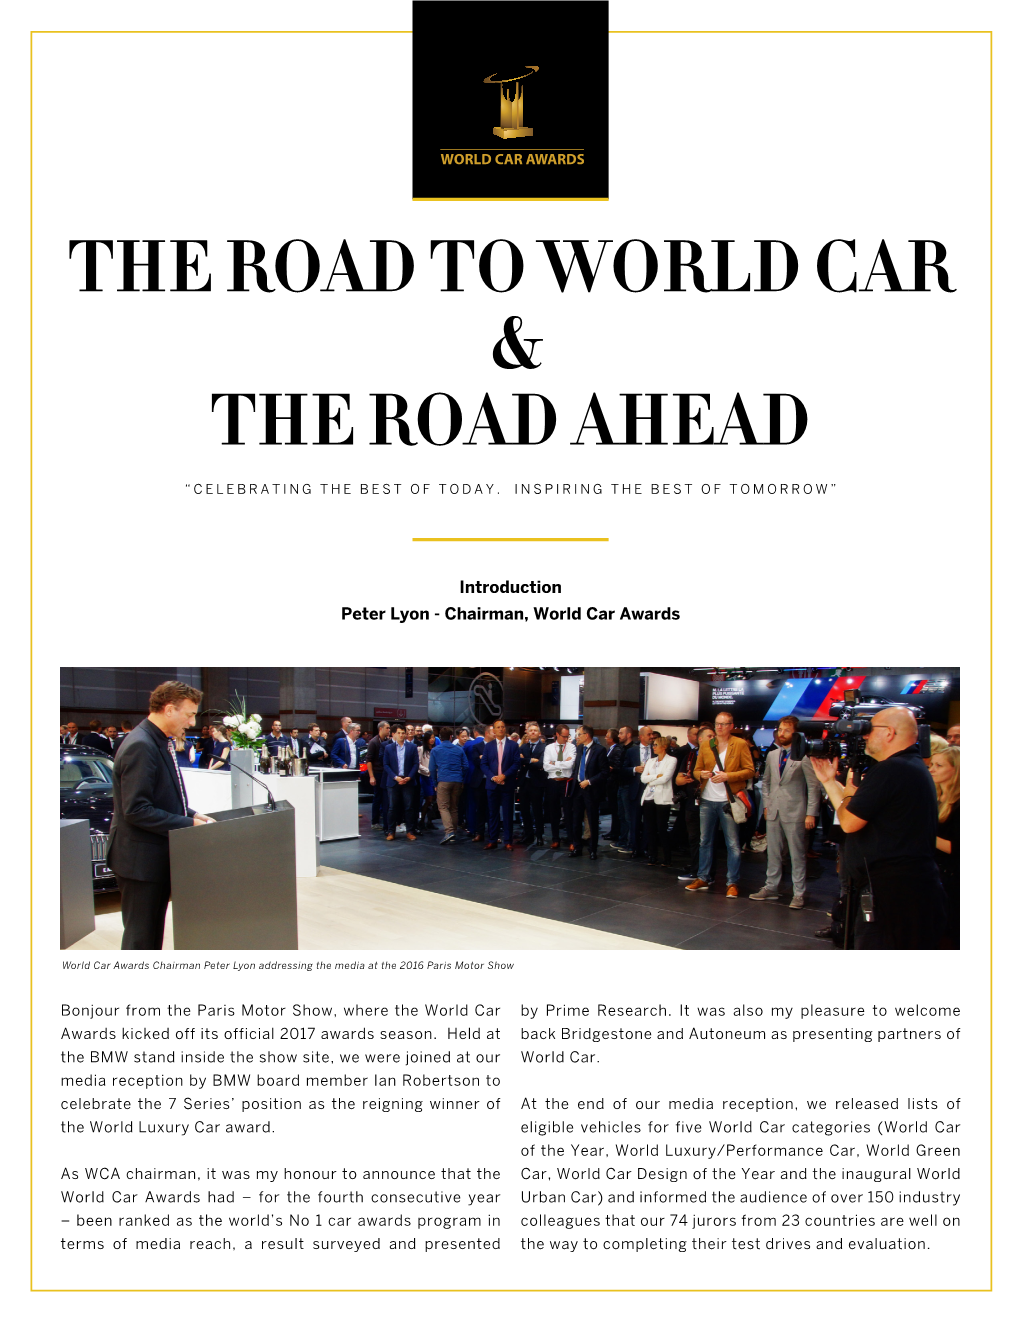 The Road to World Car & the Road Ahead